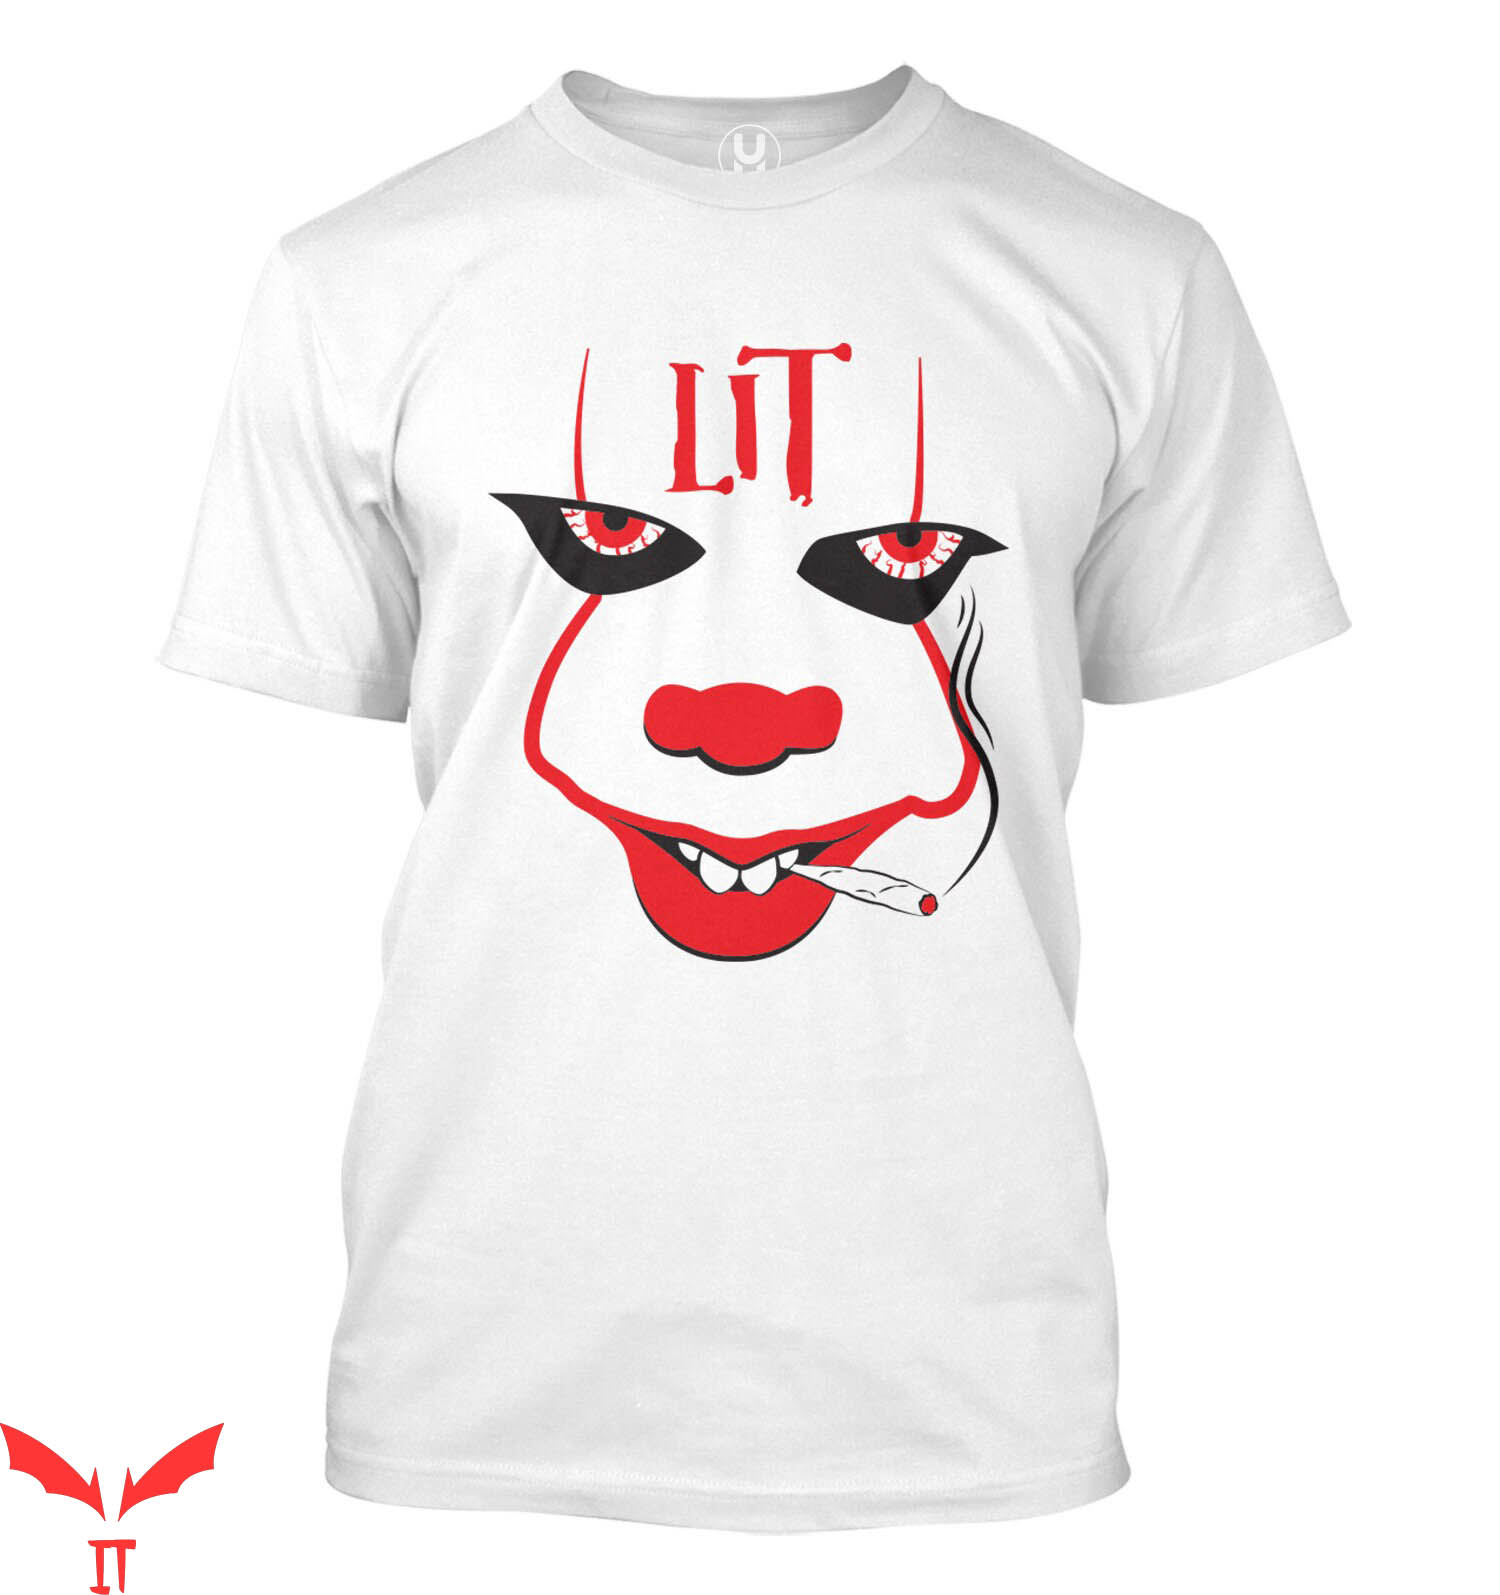 We All Float Down Here T-Shirt LIT Clown Pennywise IT Movie